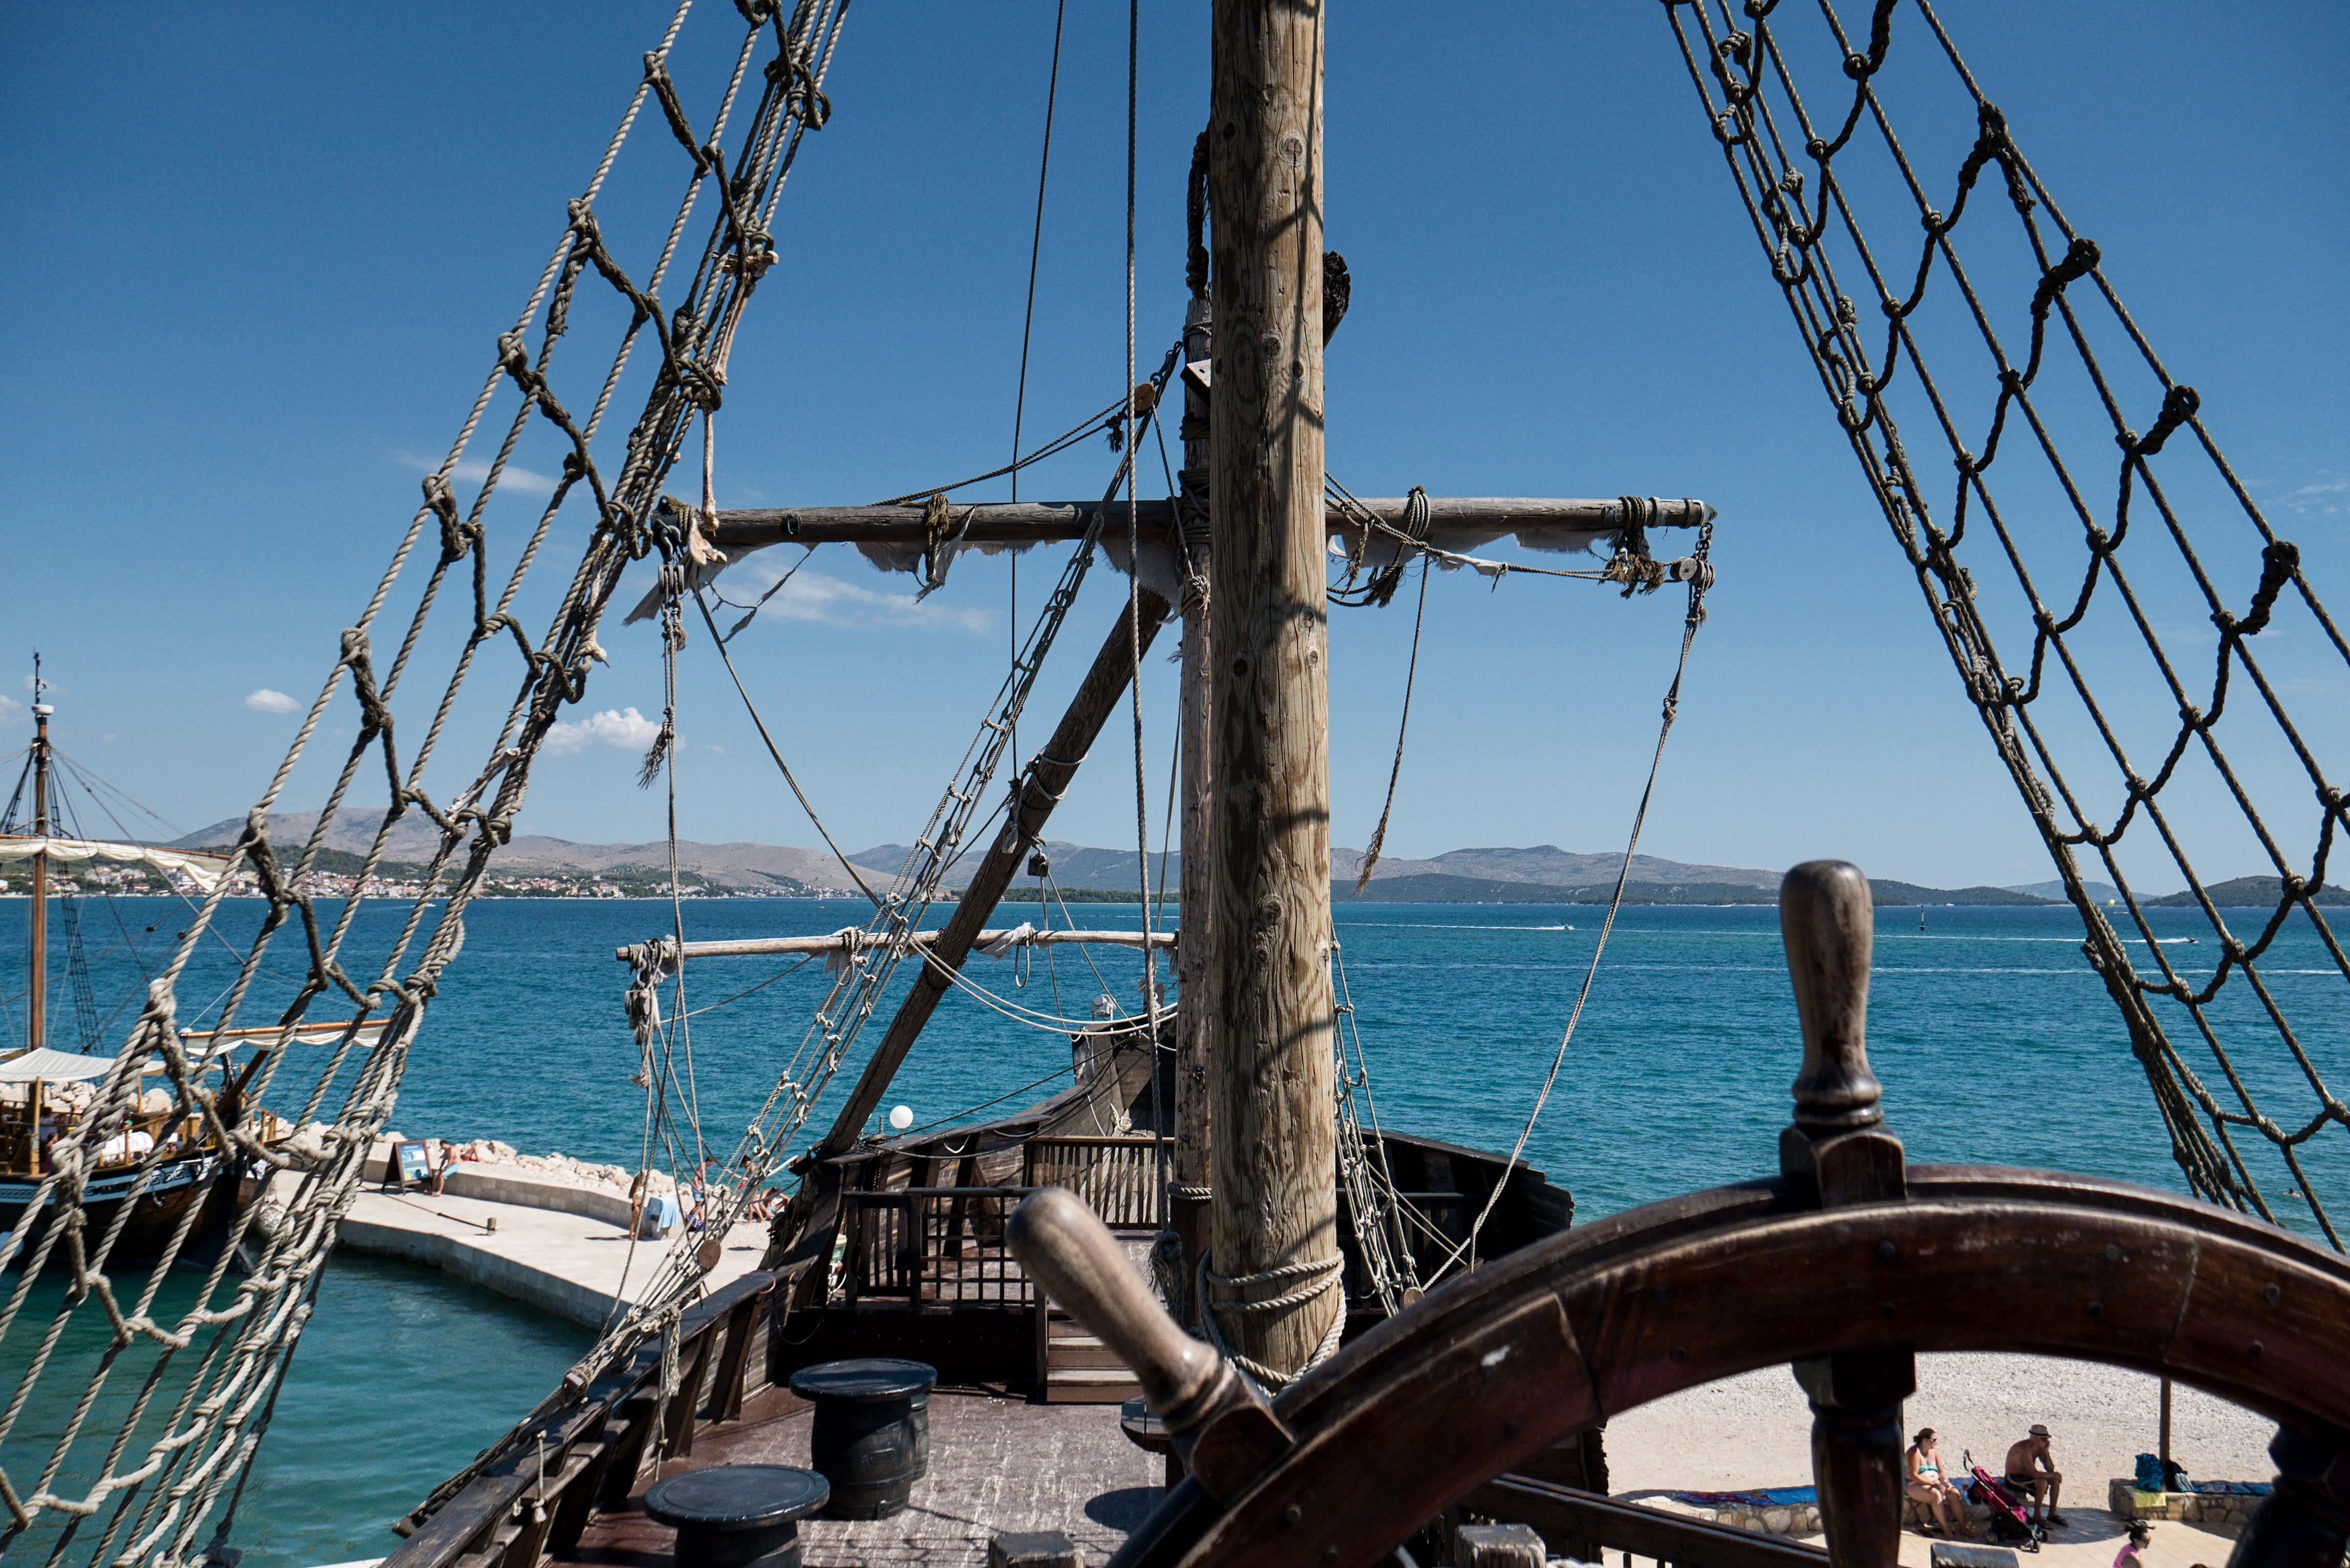 Pirate Ship Life: What It Was Like to Live On a Pirate Ship